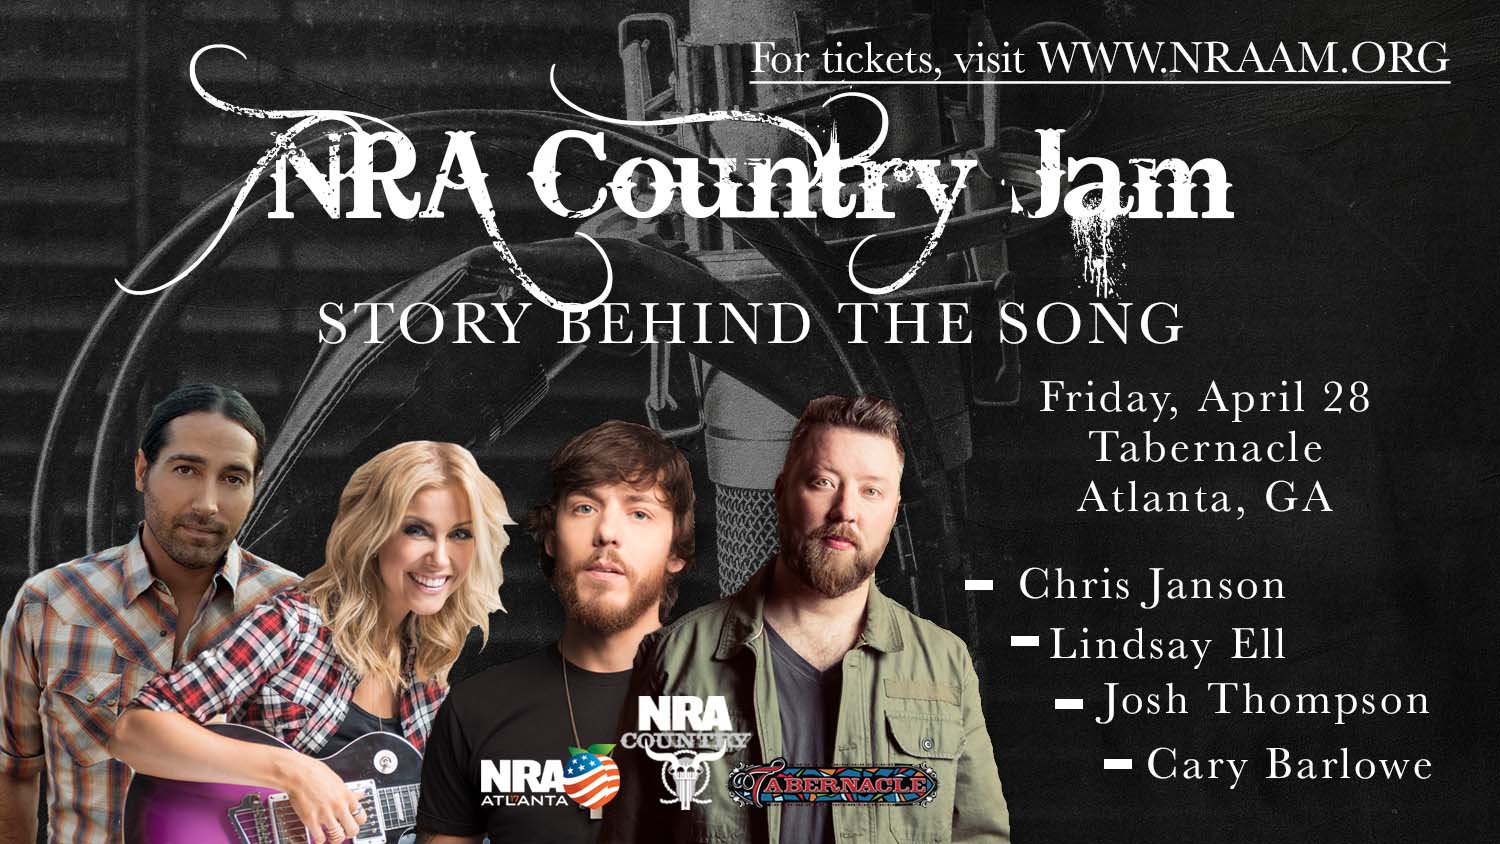 NRA Country Jam: Story Behind the Song